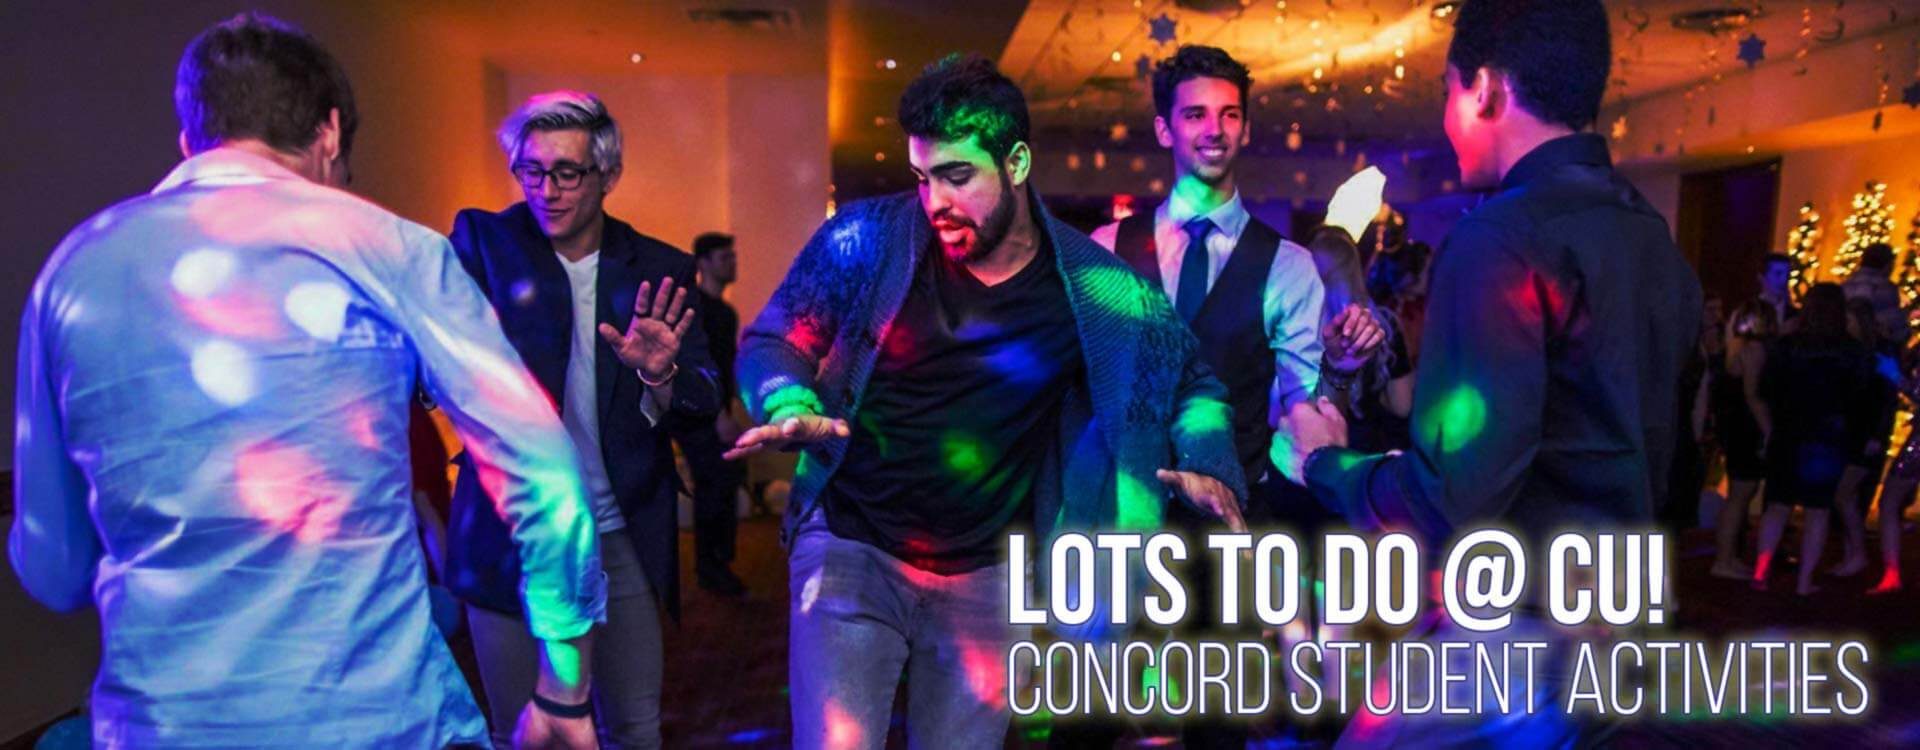 Lots to do at CU! Click here to learn more about concord student activities